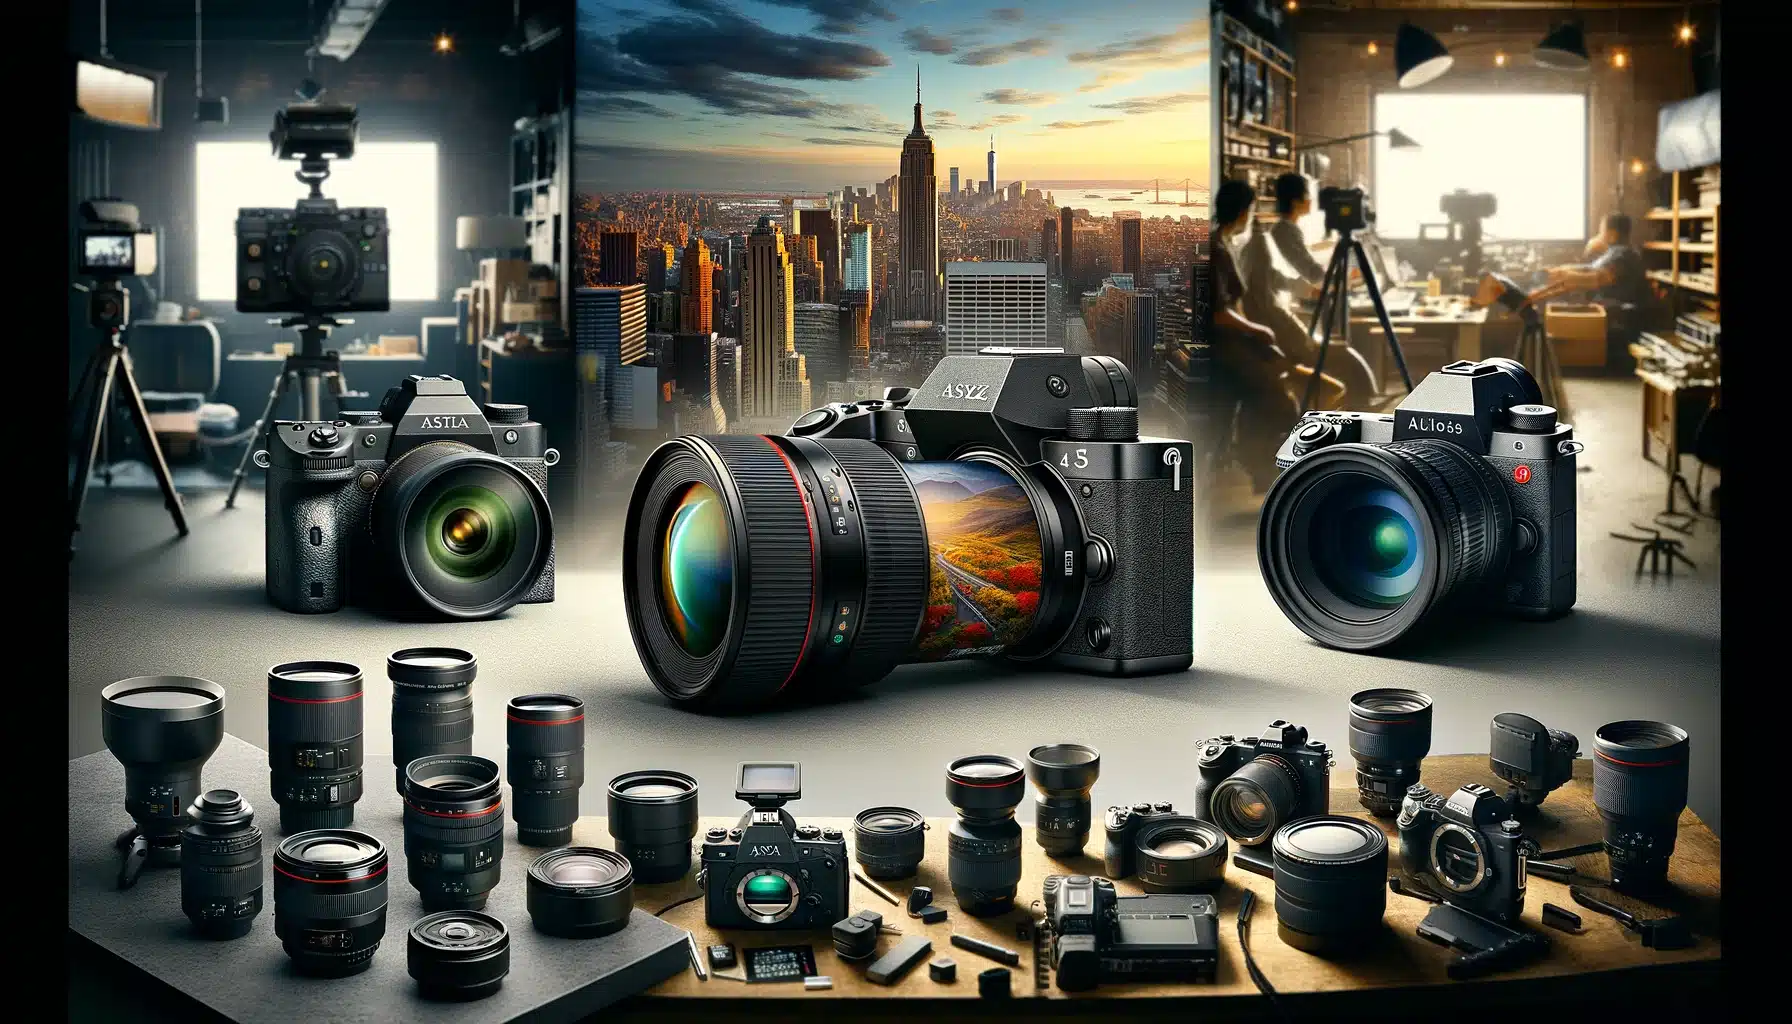 A collage of professional cameras (DSLR, mirrorless, medium format) against backgrounds of a city, nature, and a studio, illustrating the range of professional photography equipment.